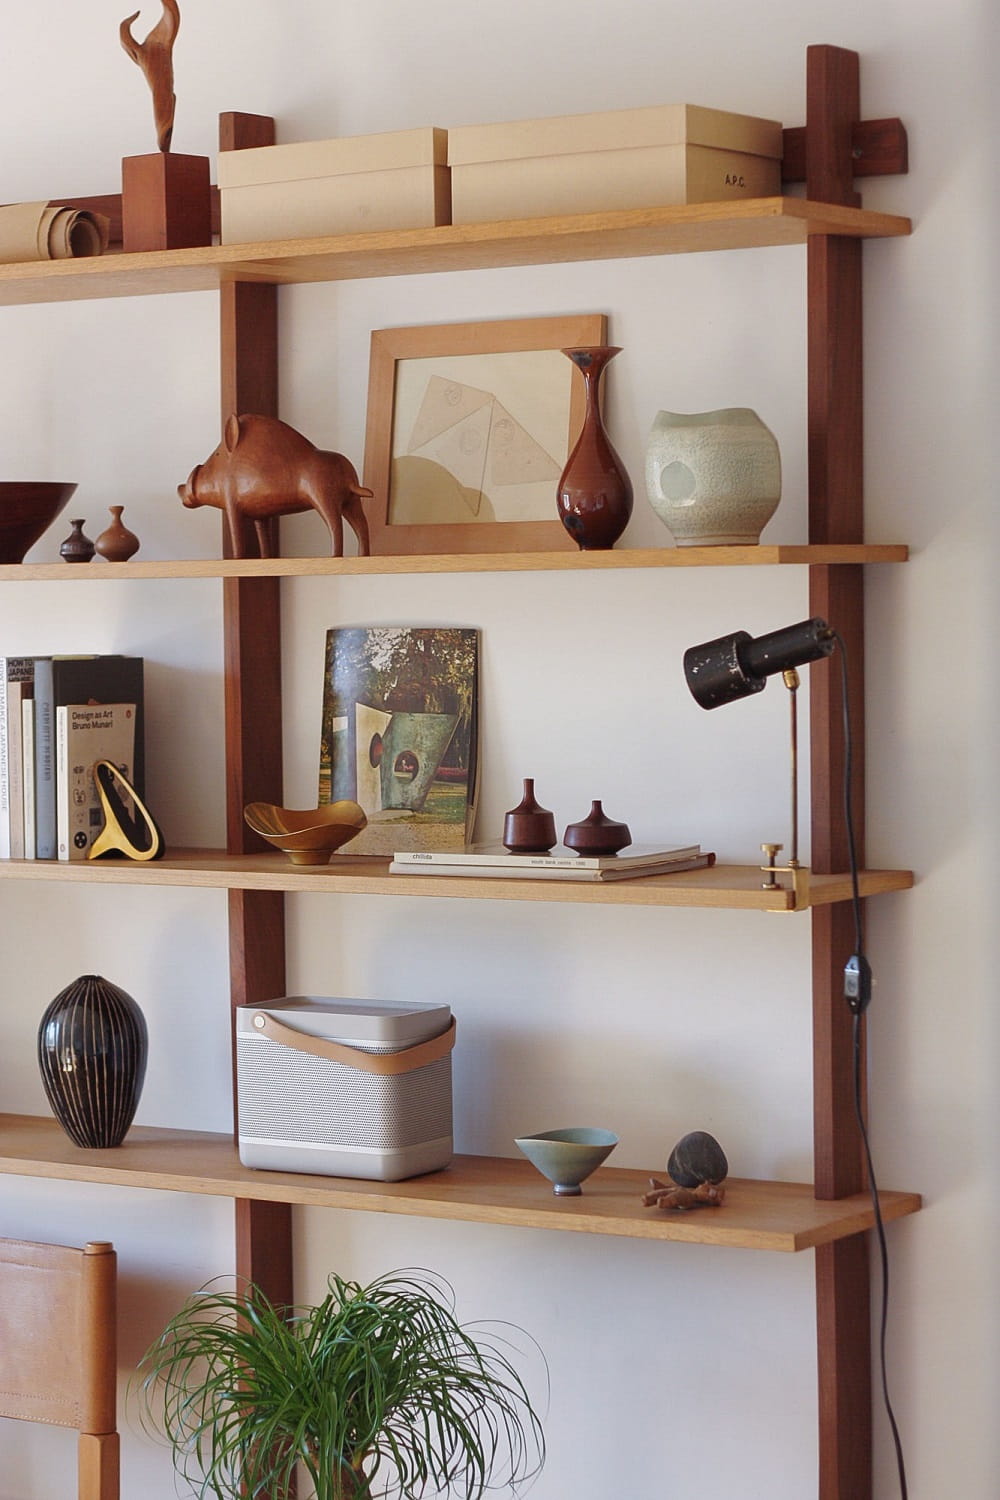 Sticotti Shelving from Design Within Reach